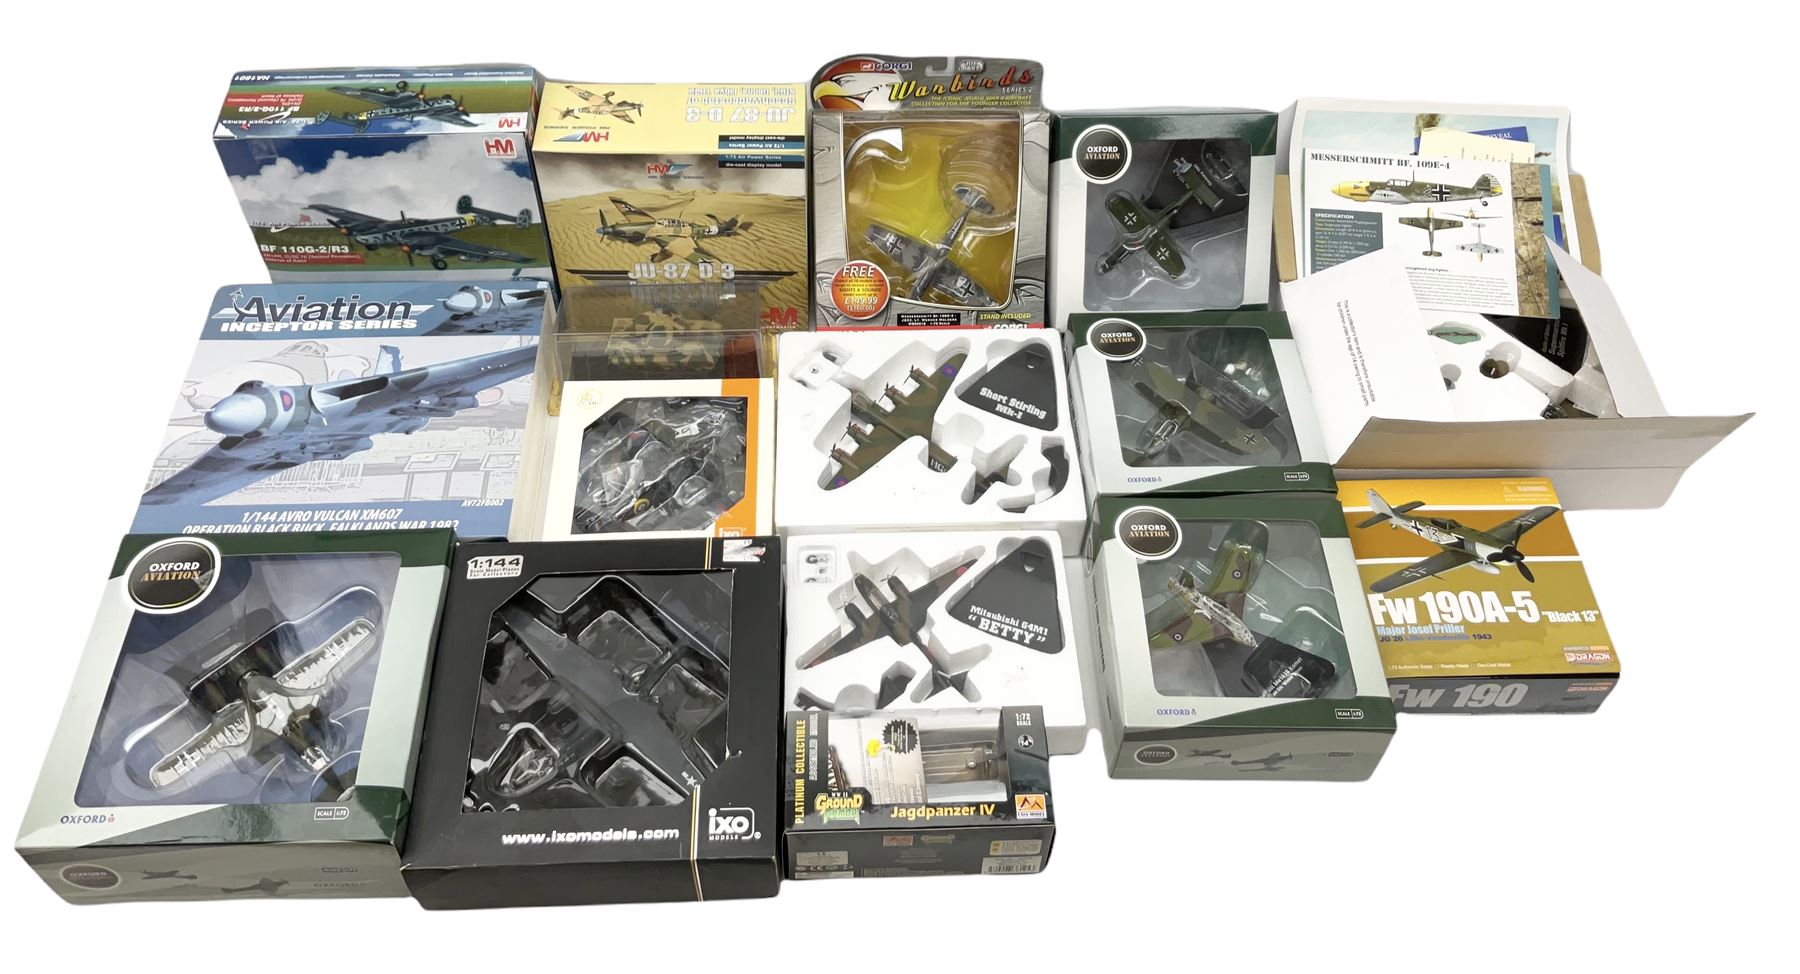 Fourteen die-cast models of aircraft including four Oxford Aviation